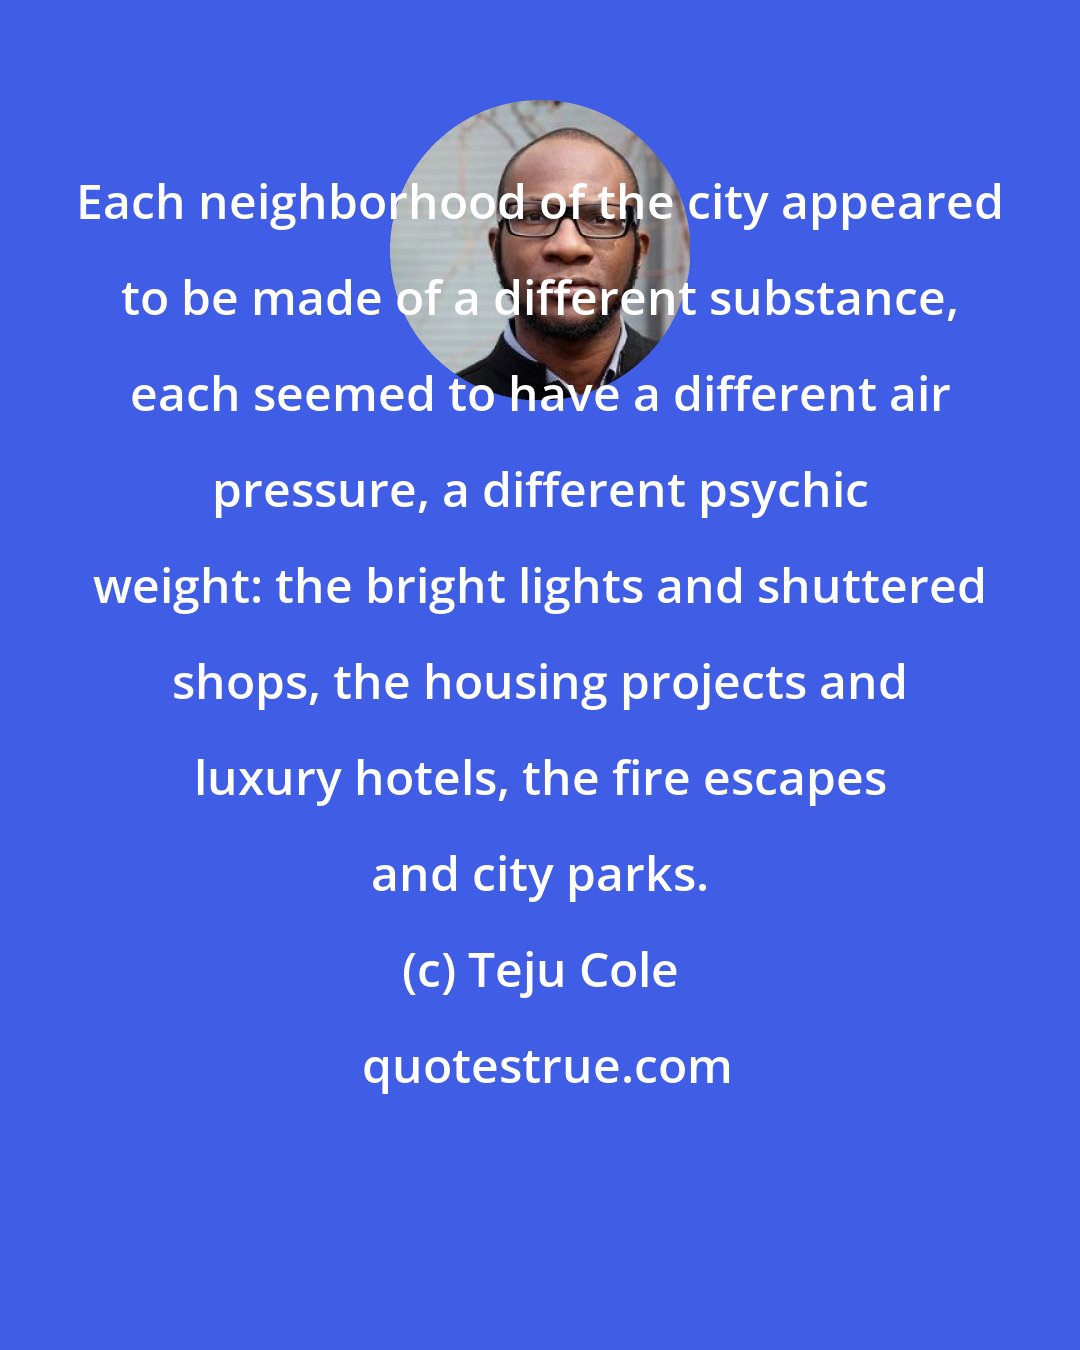 Teju Cole: Each neighborhood of the city appeared to be made of a different substance, each seemed to have a different air pressure, a different psychic weight: the bright lights and shuttered shops, the housing projects and luxury hotels, the fire escapes and city parks.